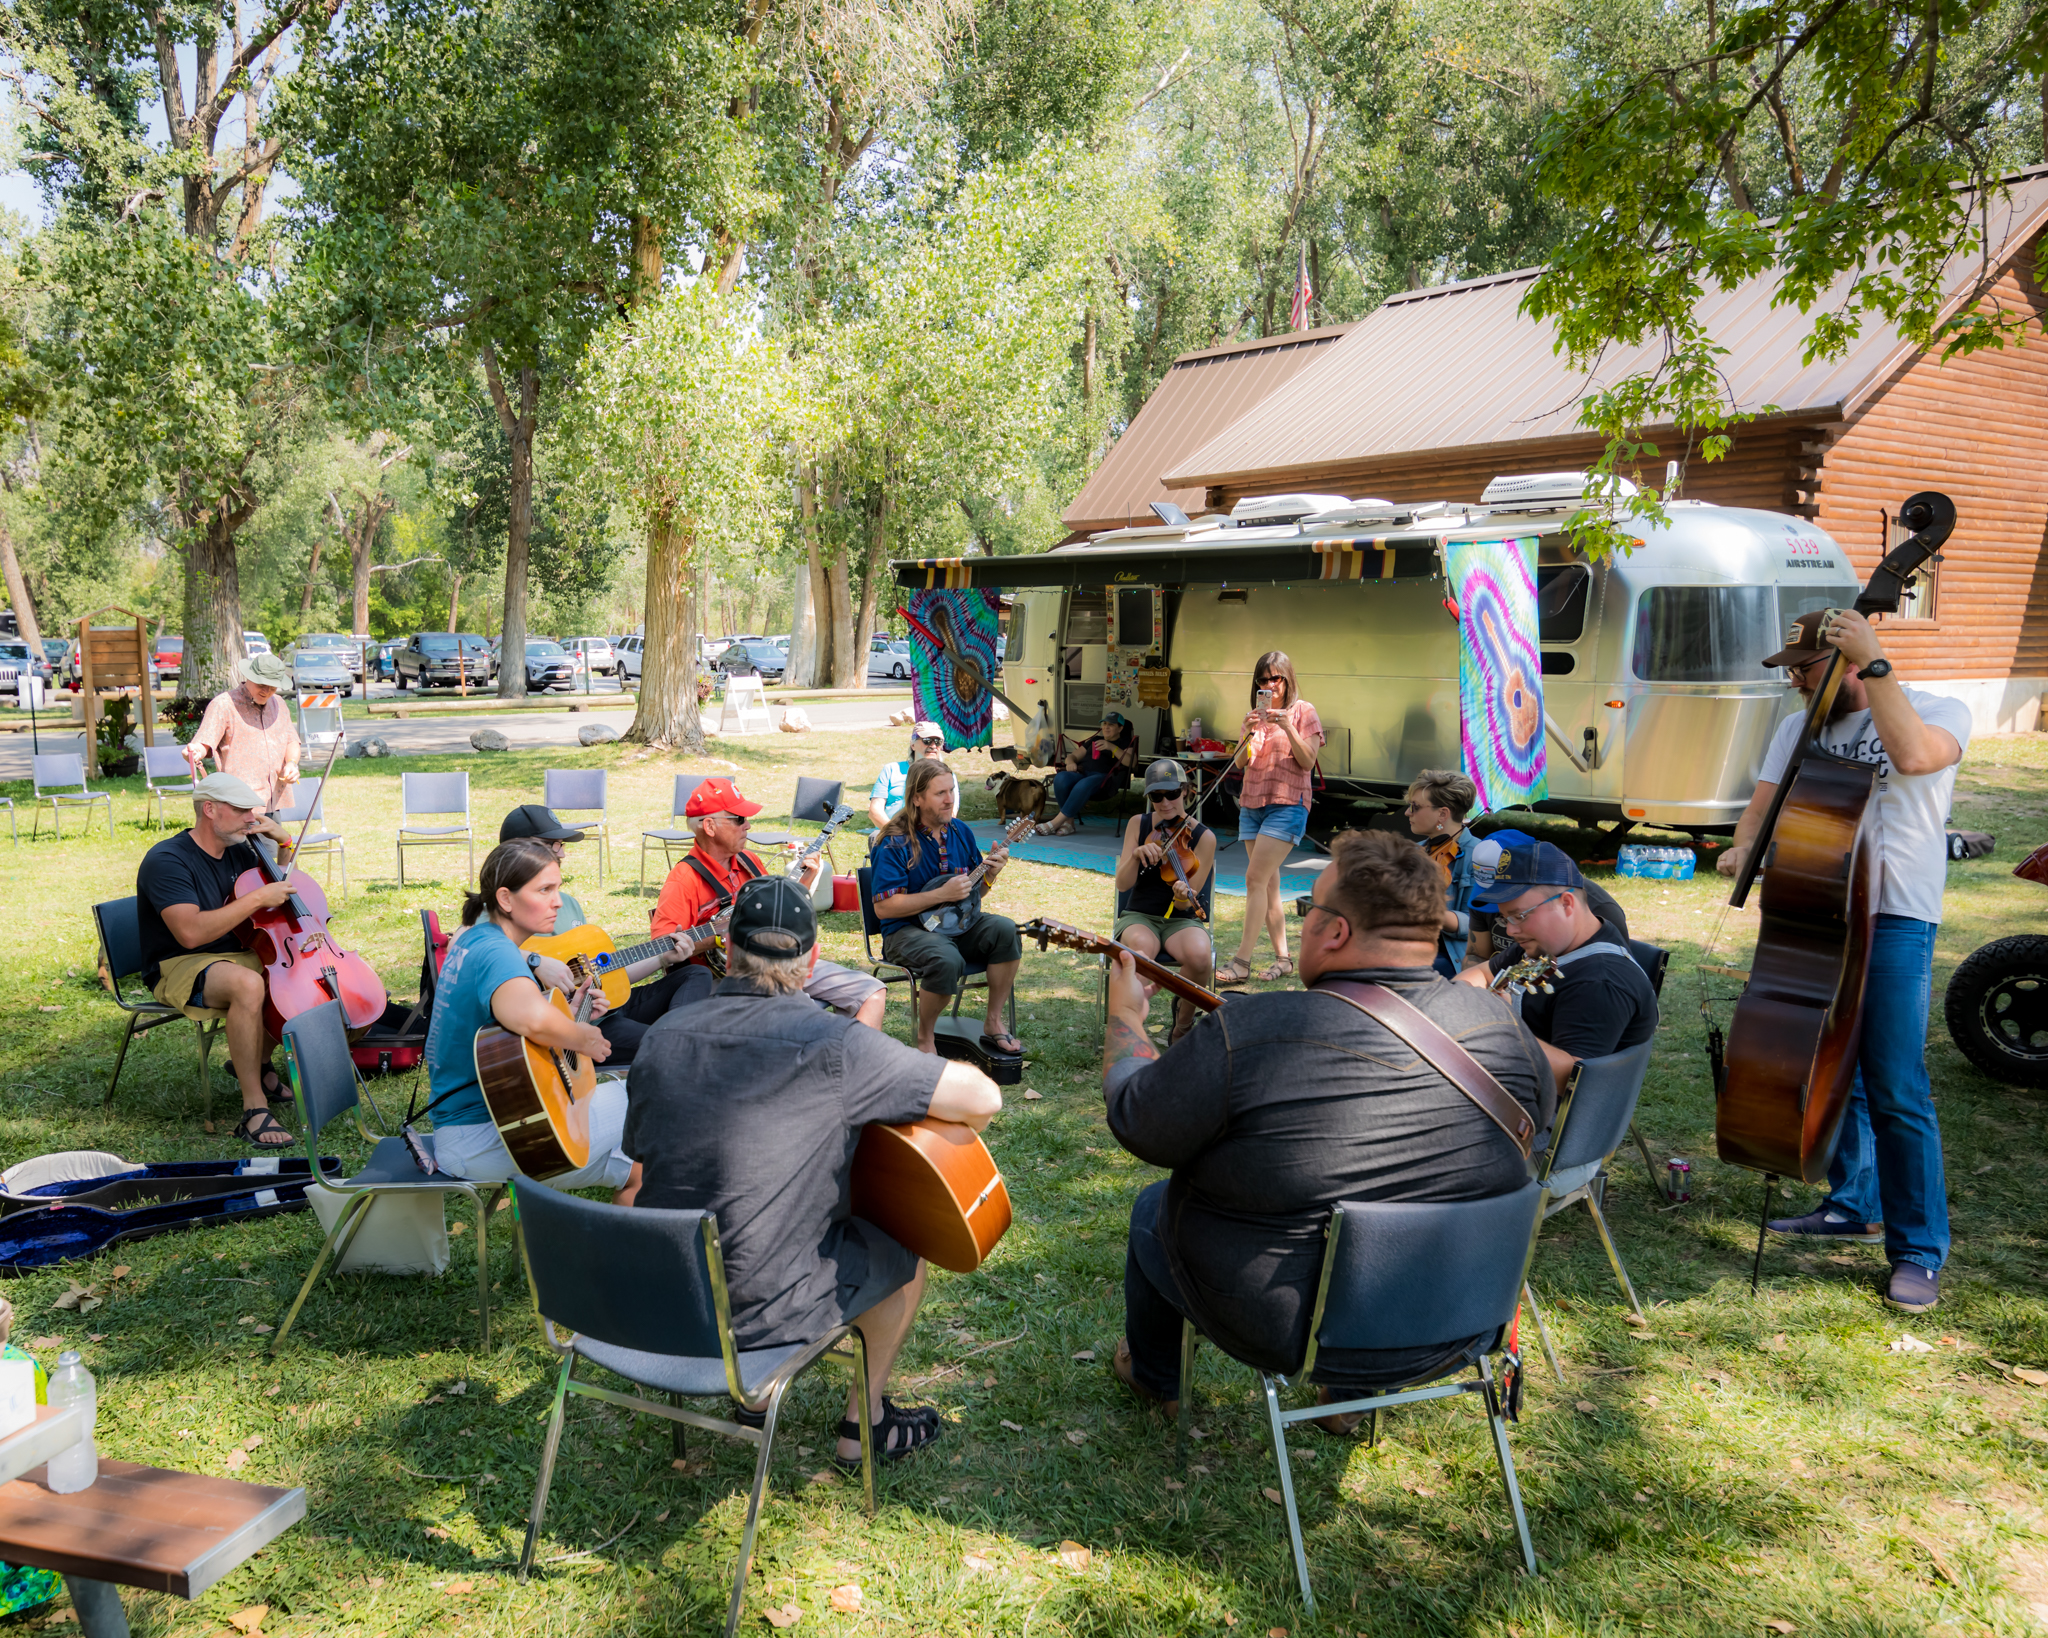 People sitting in a circle with guitars and other instruments playing together in front of an airstream trailer